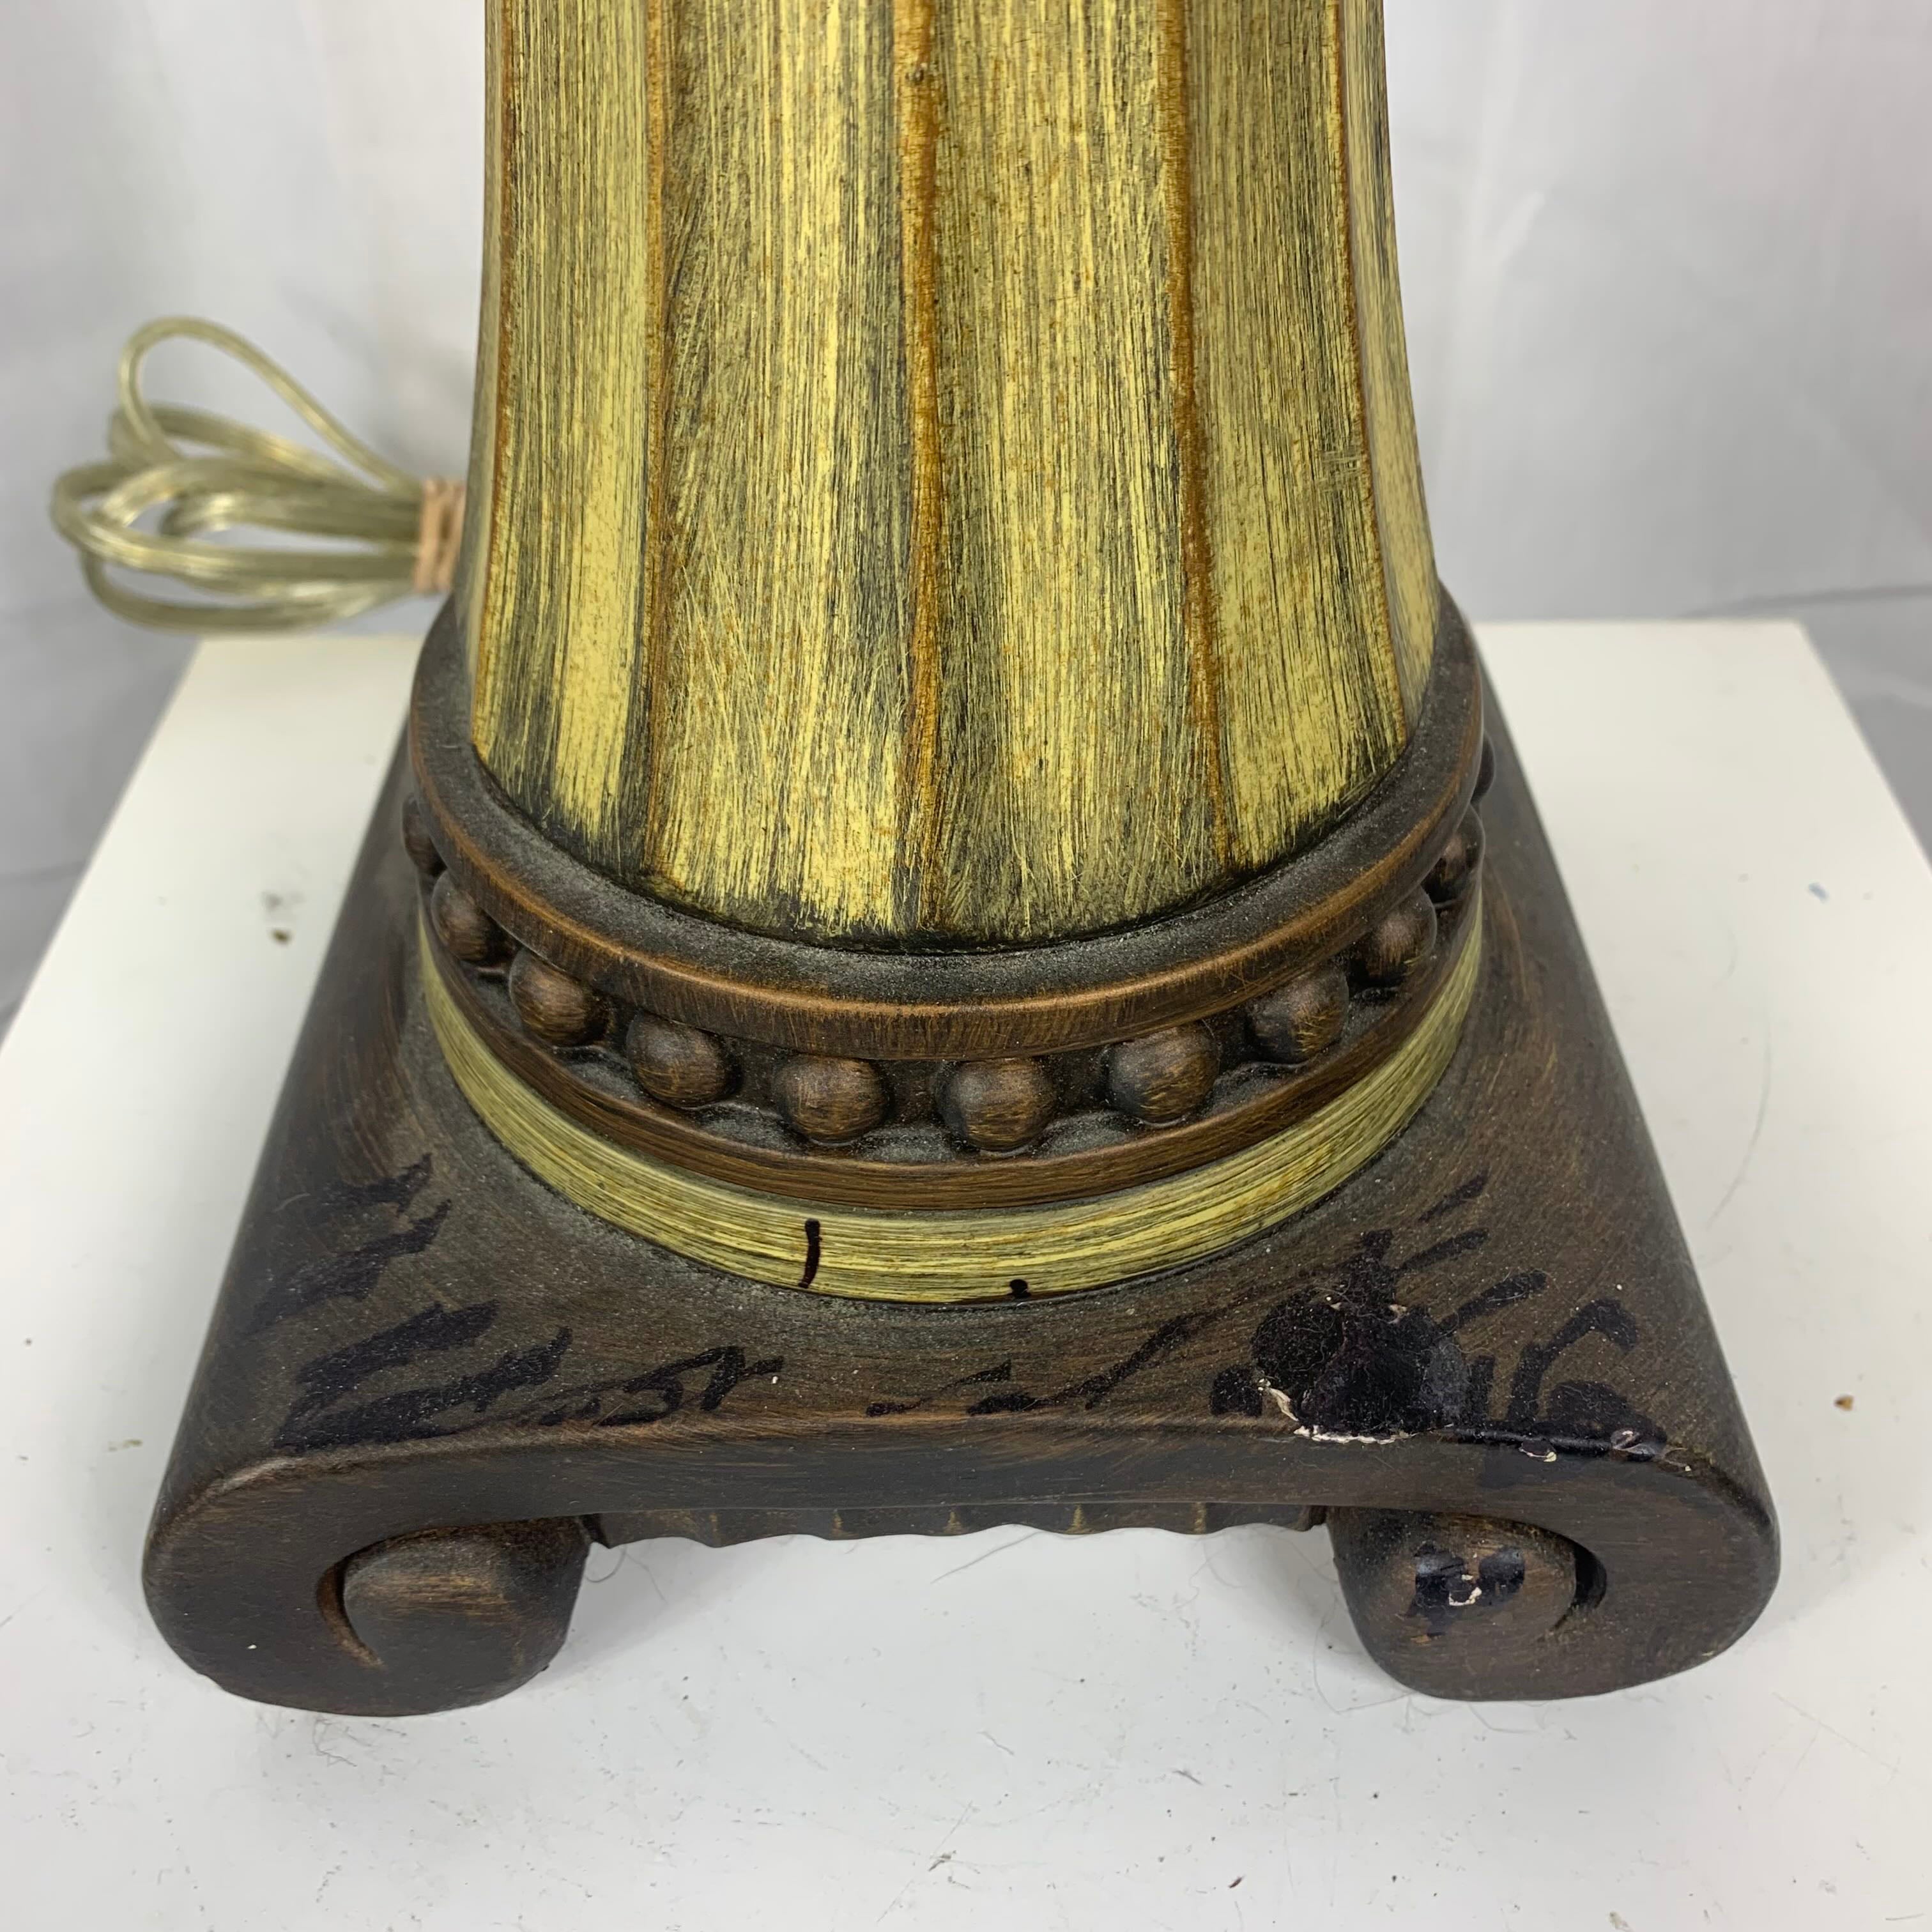 7"x 7"x 31.5" American Lamp Co Beige Ceramic with Leaf Detail and Chip Marks Table Lamp